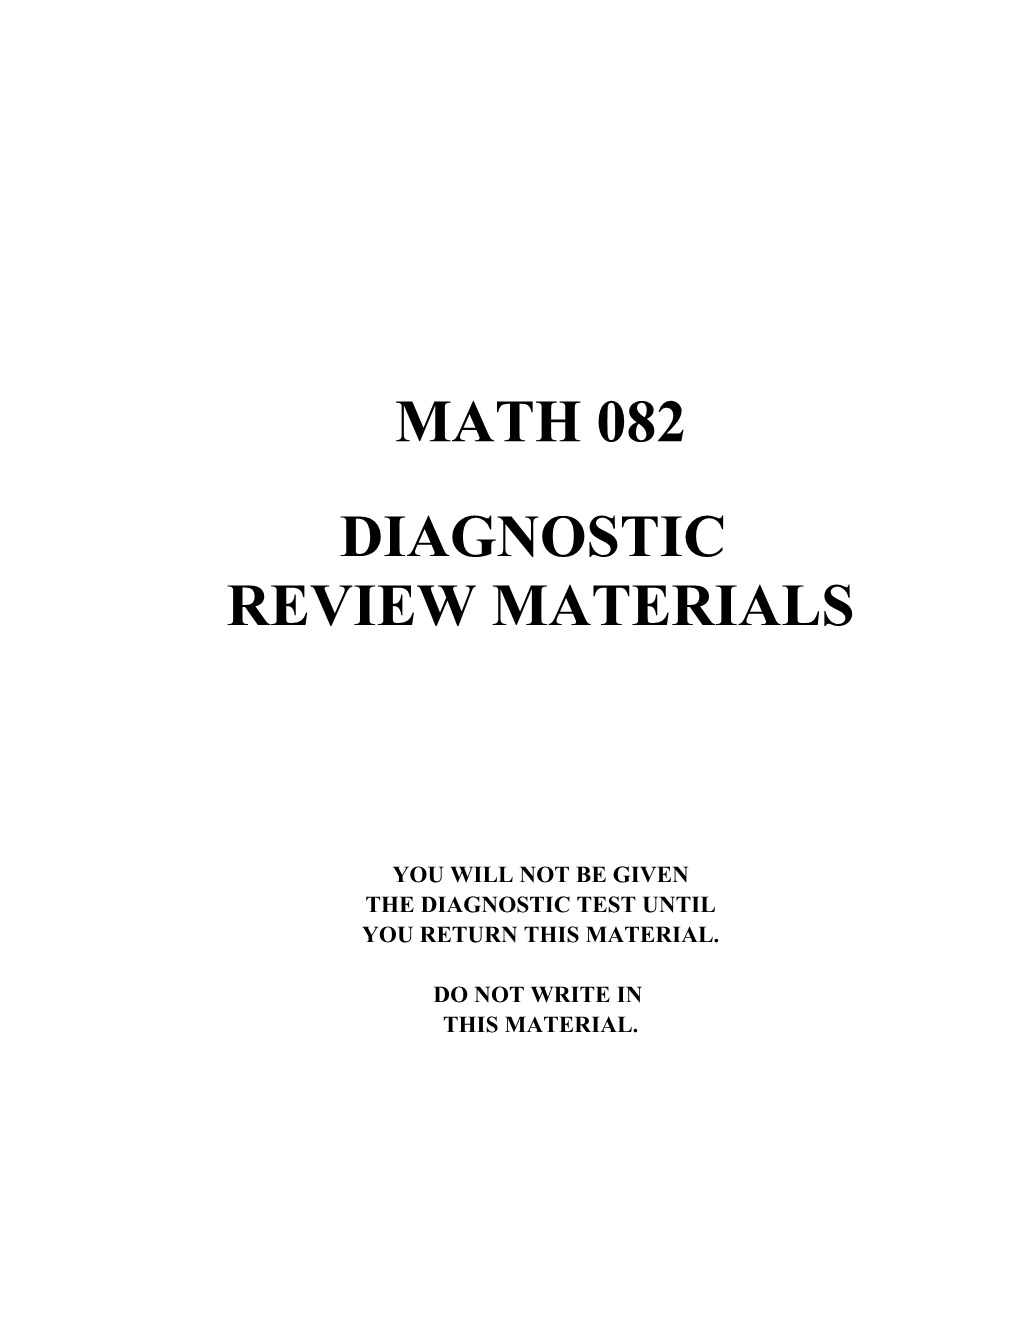 Introduction: This Booklet Is a Review for the Diagnostic Test